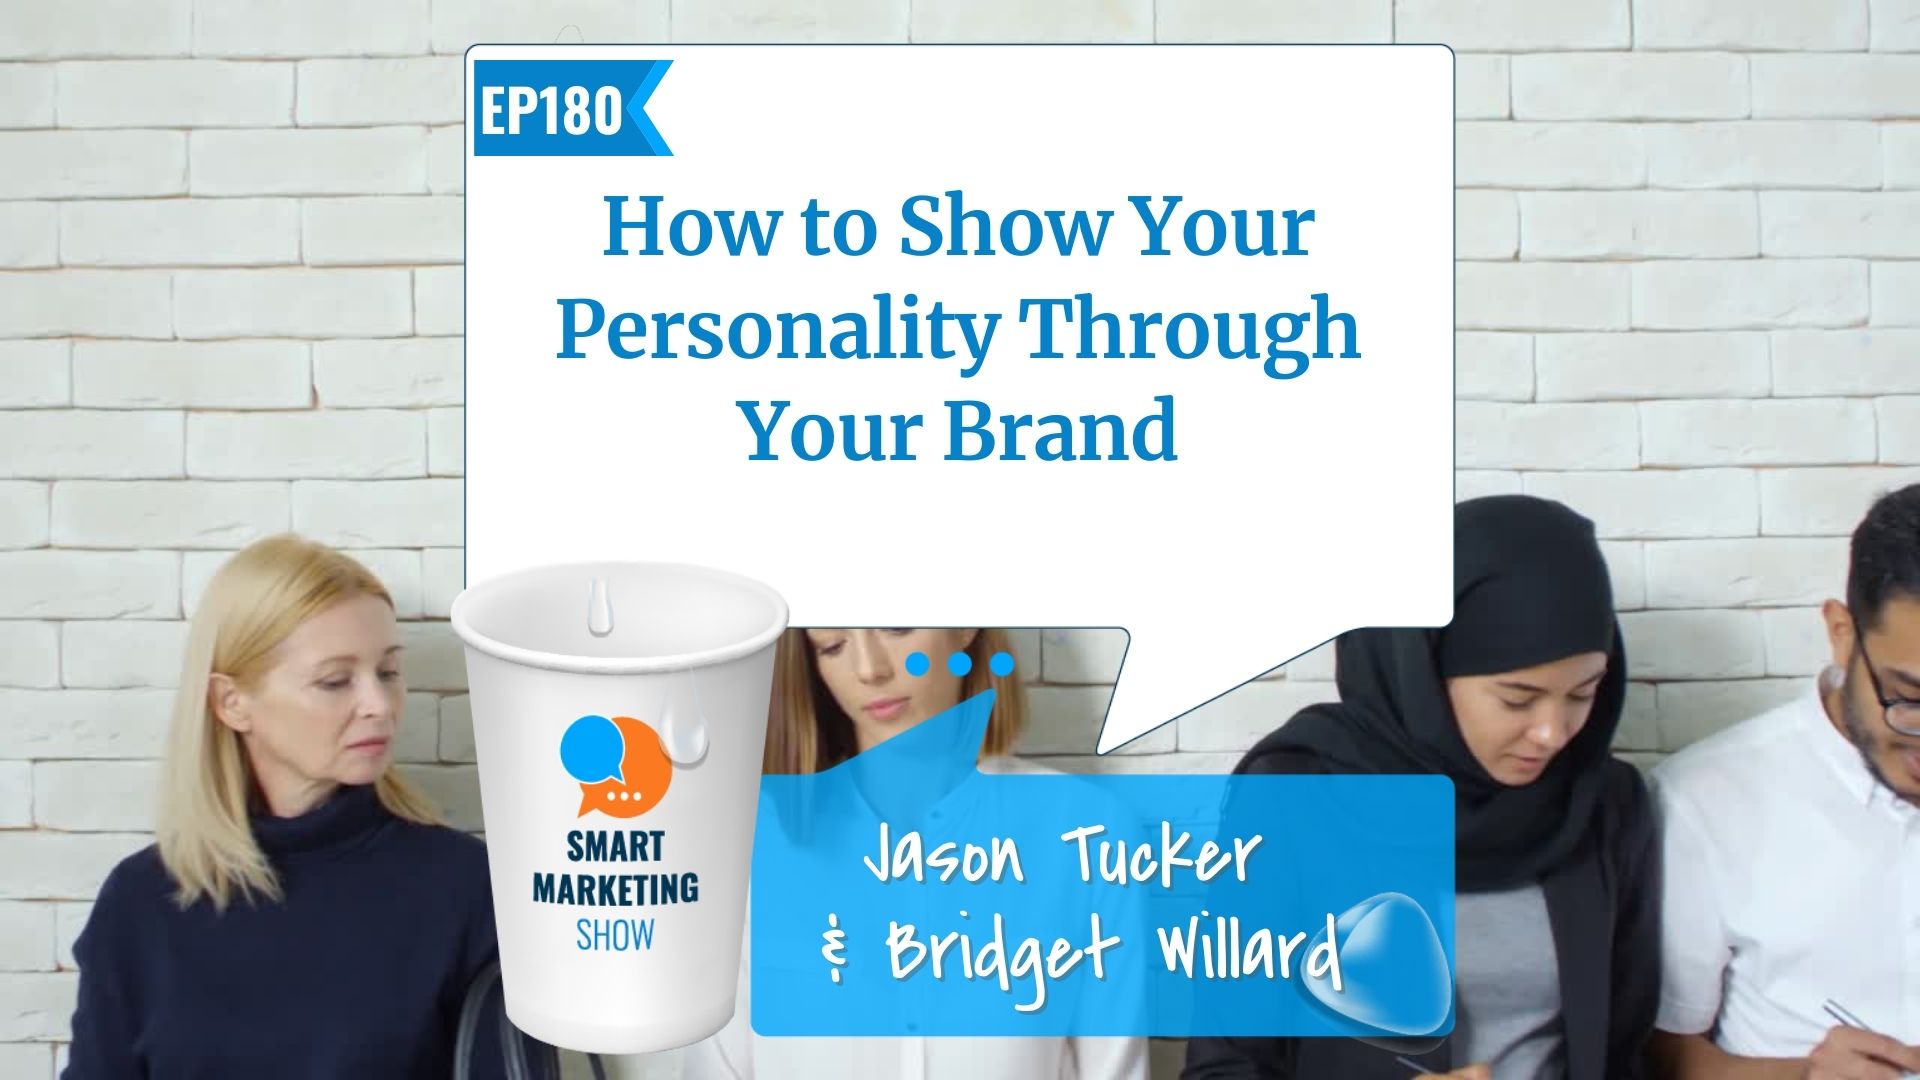 EP180 - How to Show Your Personality Through Your Brand